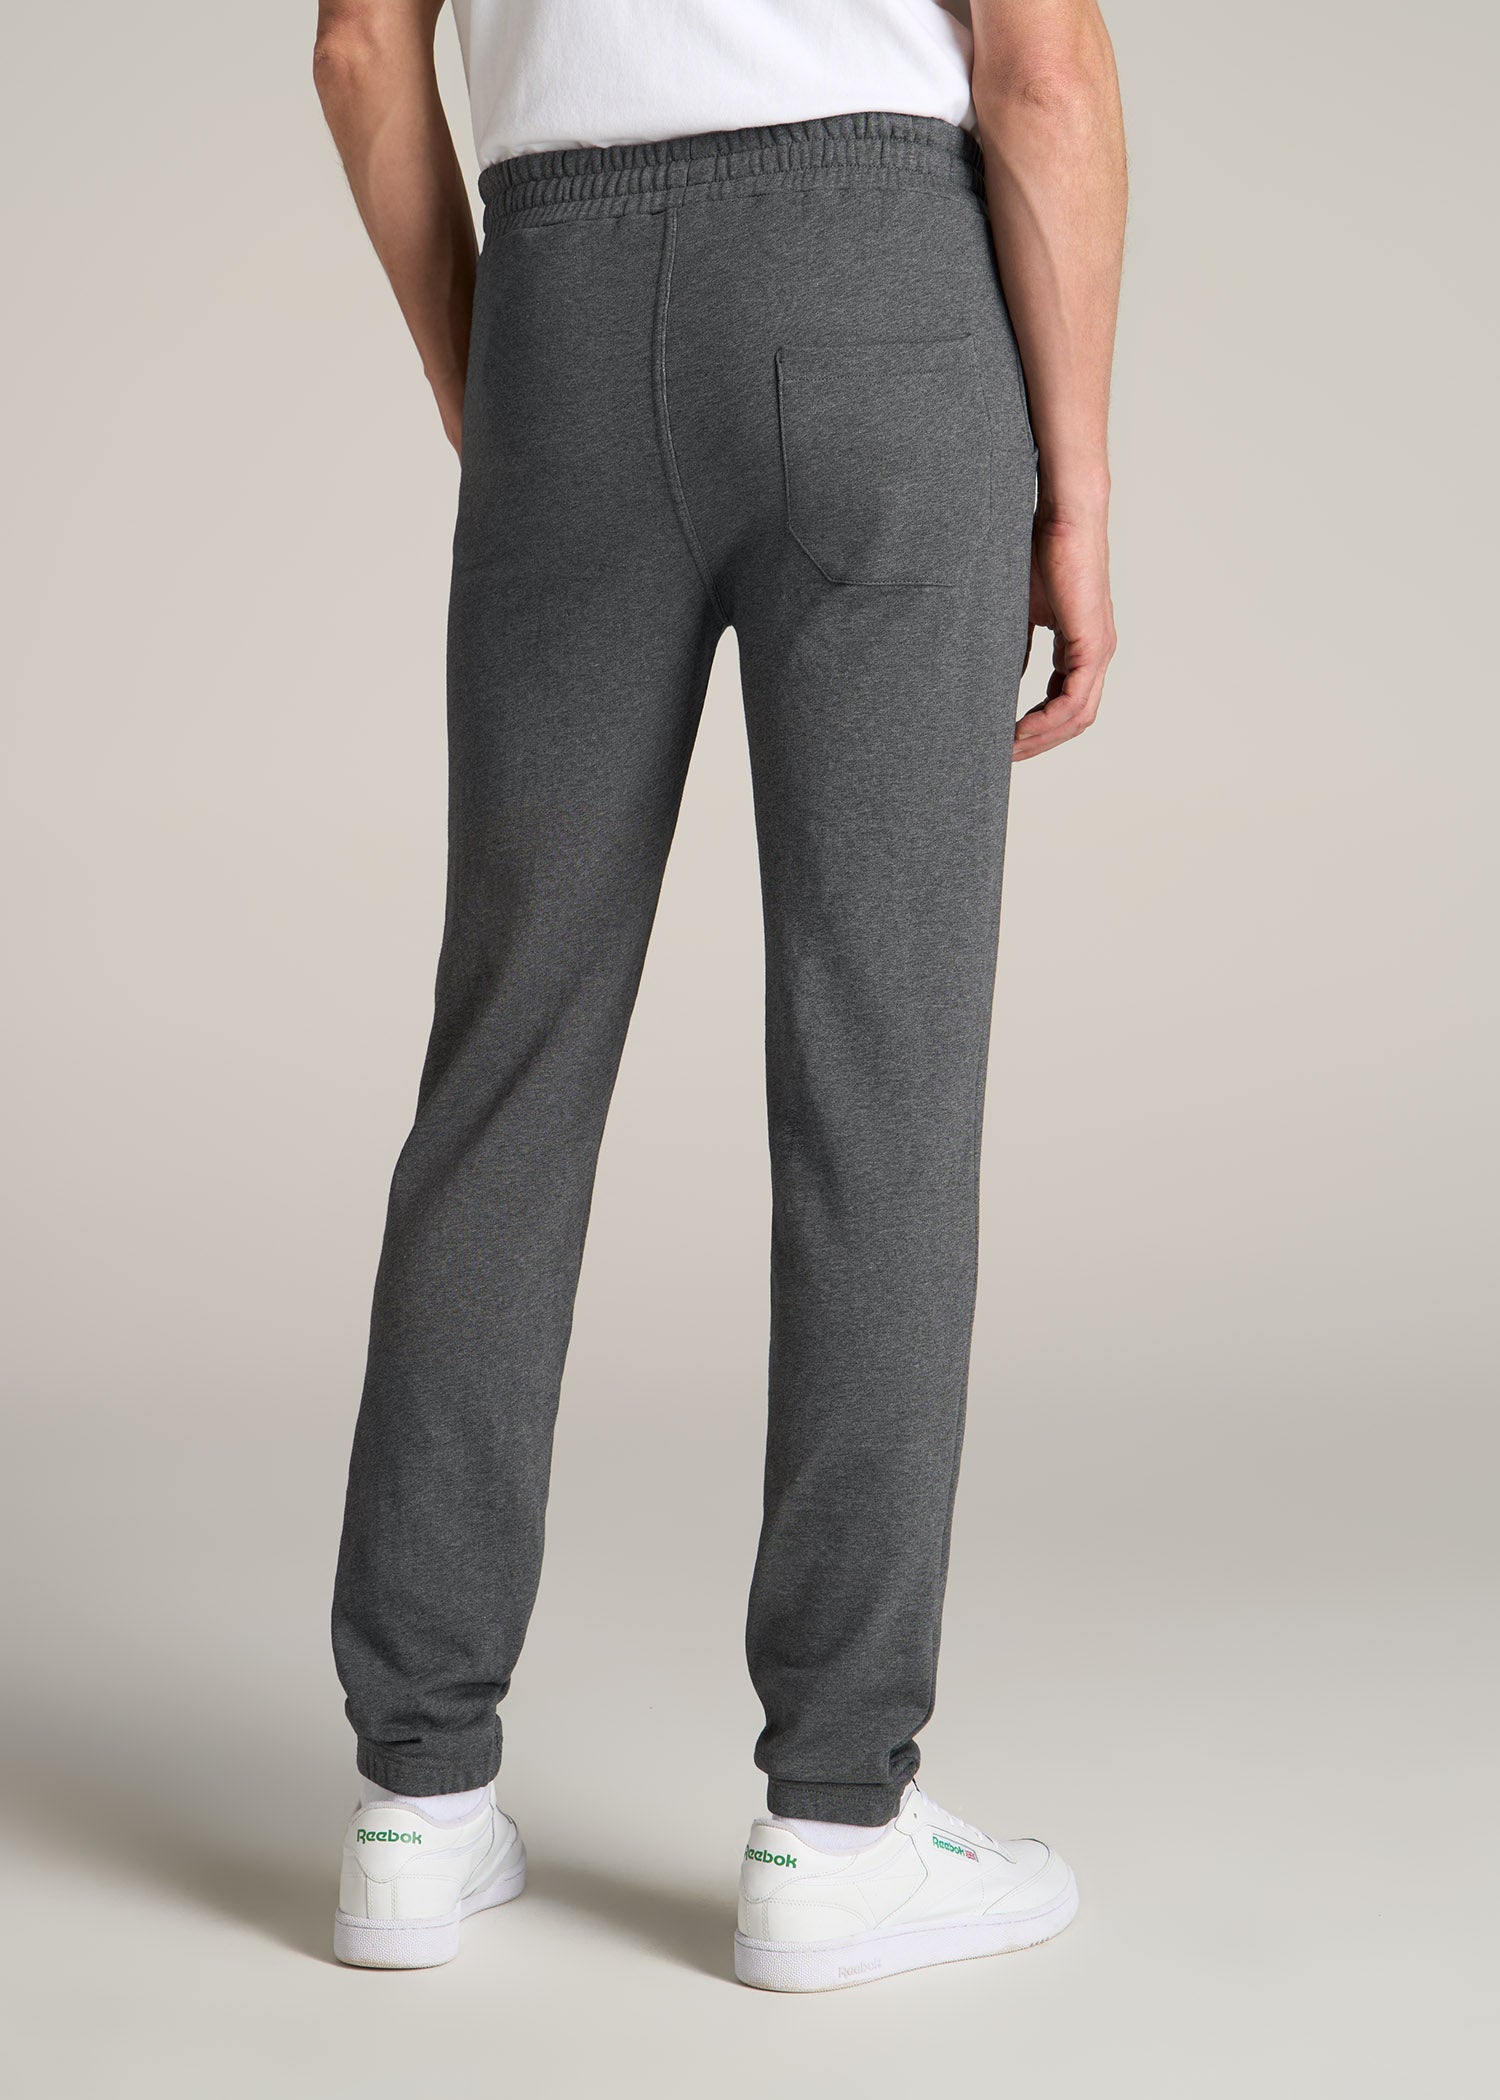 Men's Tall French Terry Sweatpants Charcoal Mix